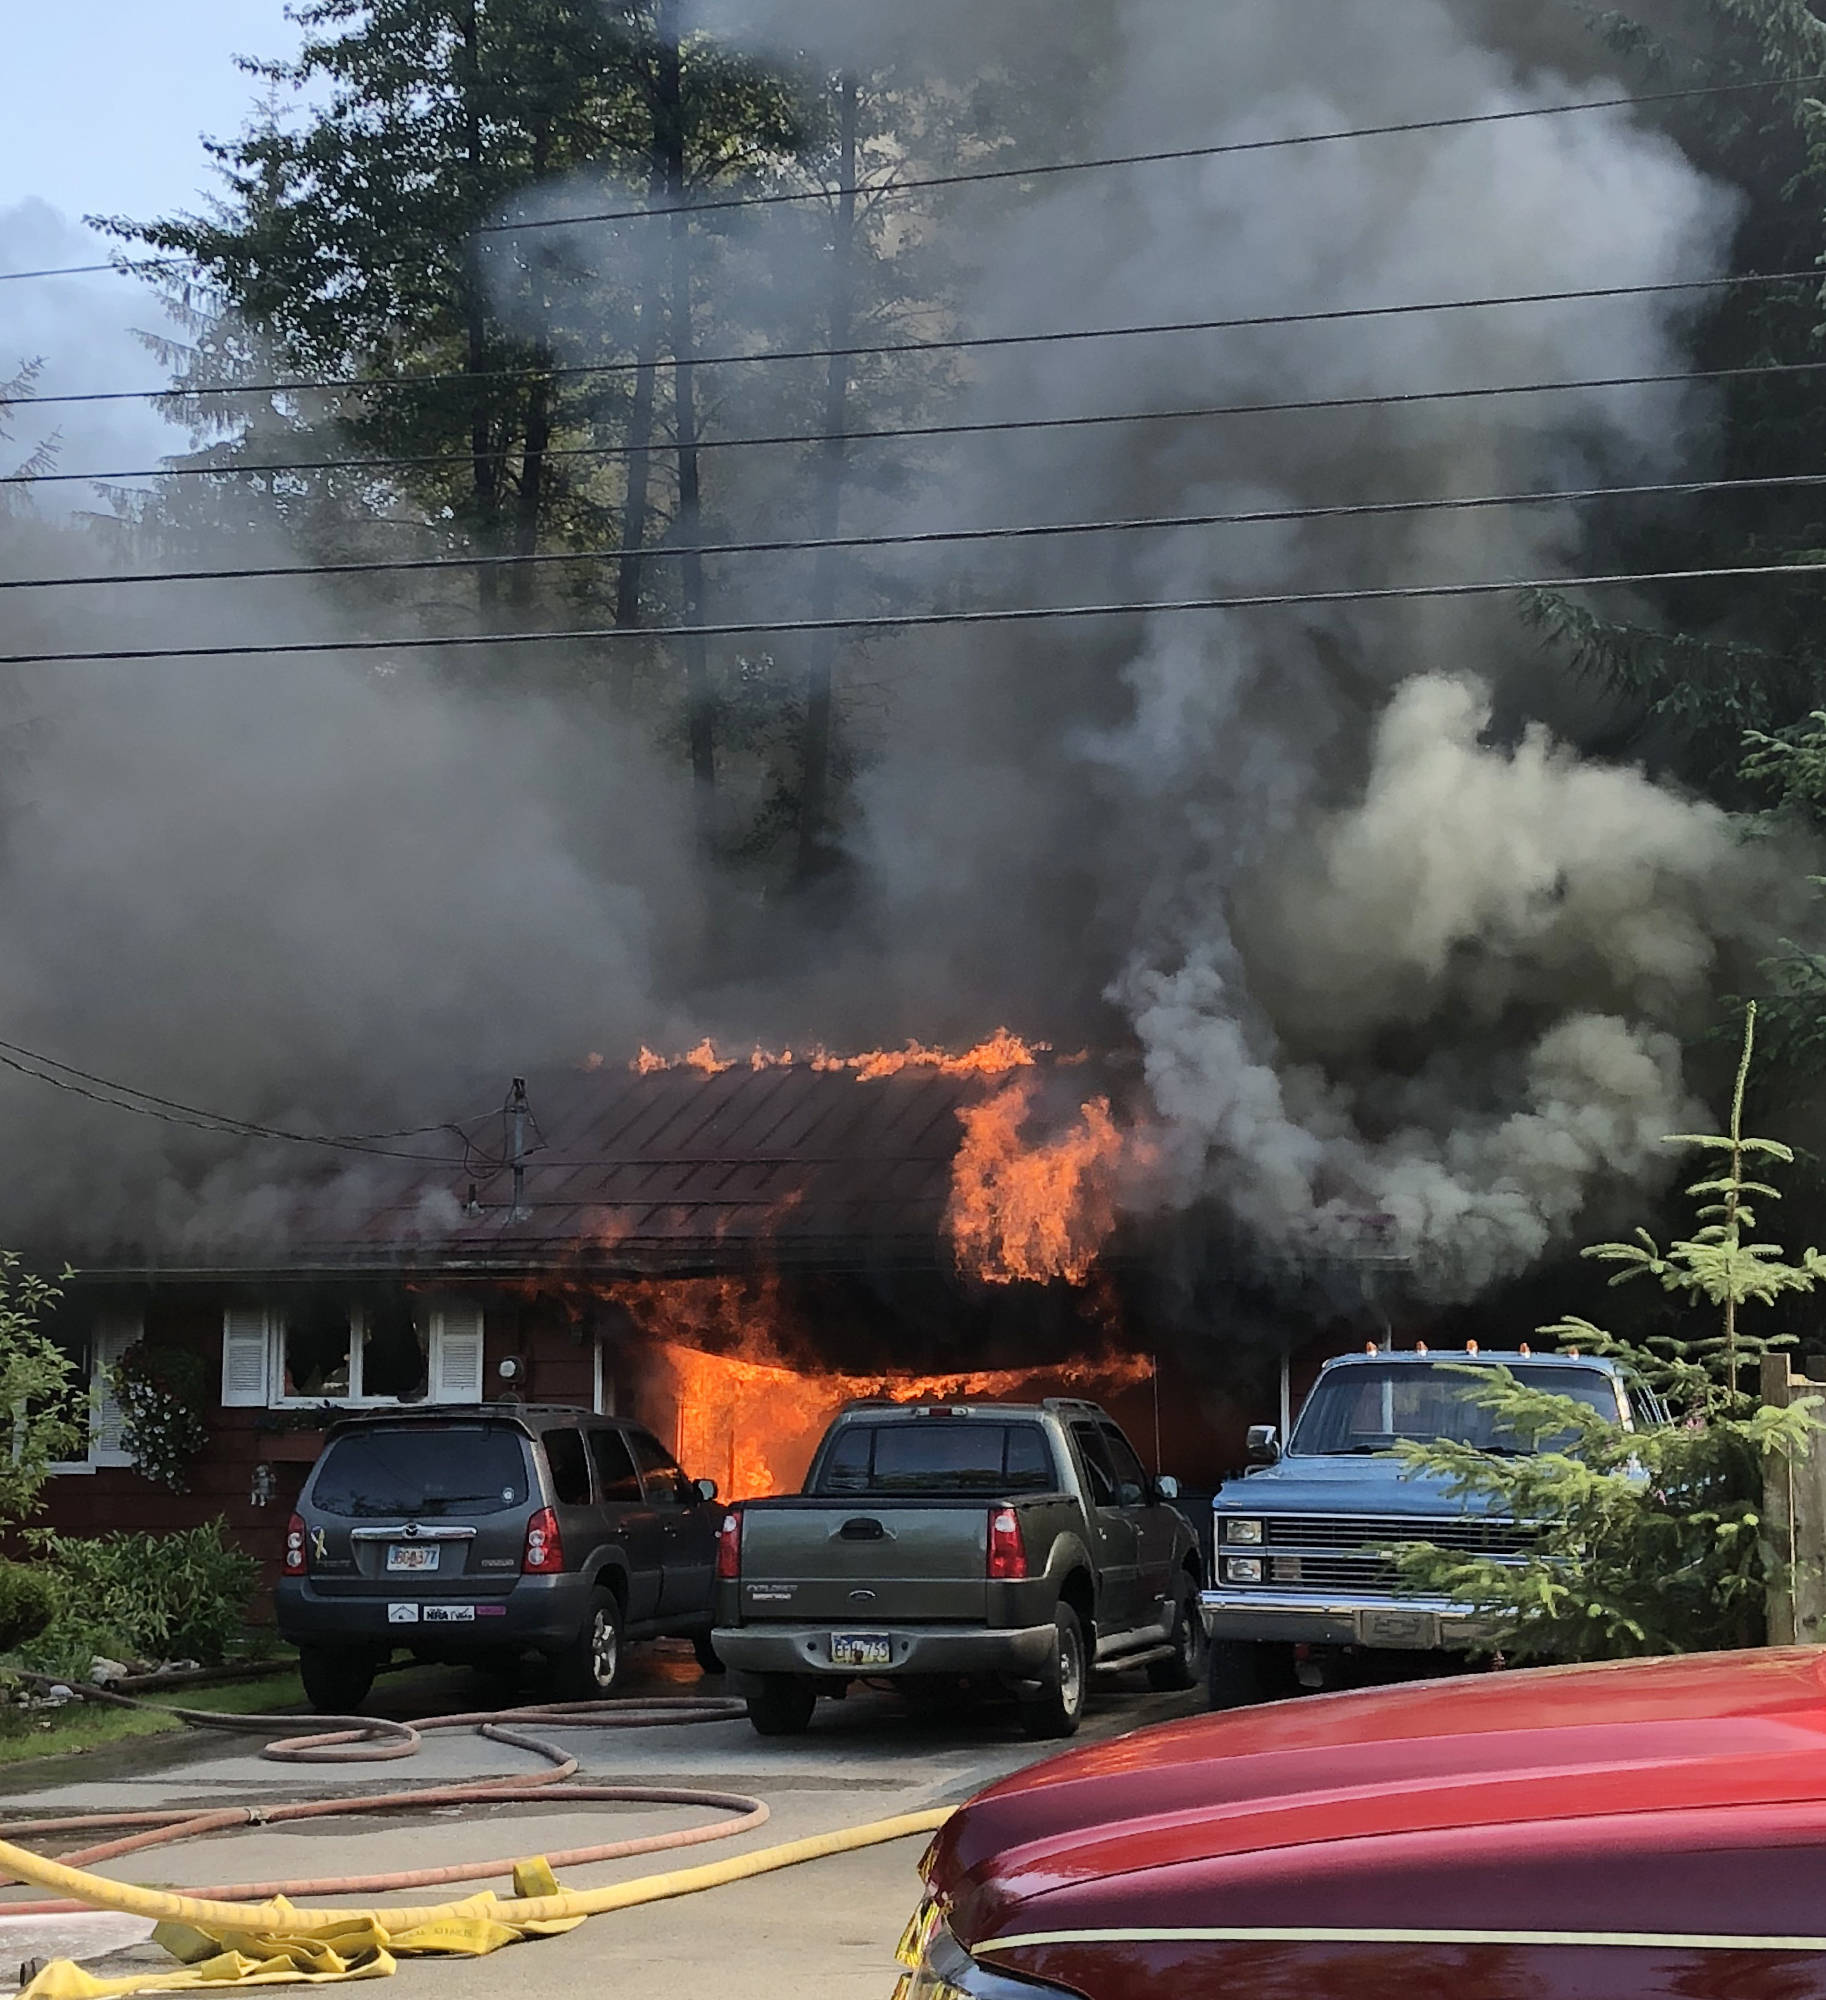 A house at 8460 Kimberly Street burns as Capital City Fire/Rescue responses on Friday, July 20, 2018. (Anna Hay | Courtesy Photo)